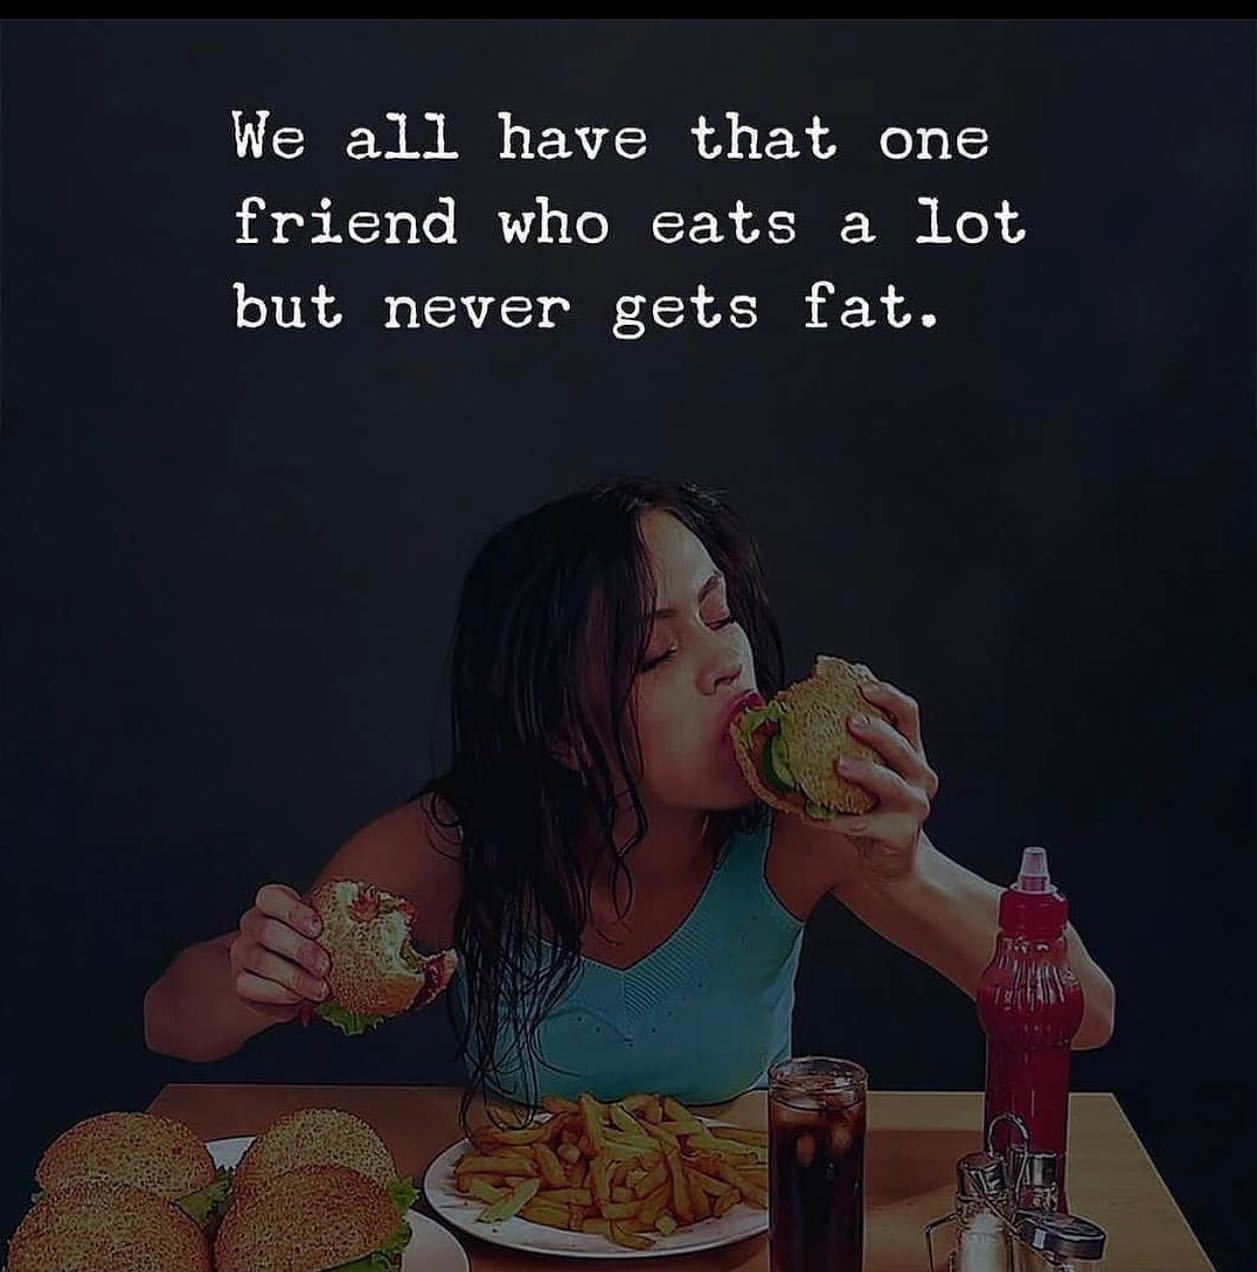 We all have that one friend who eats a lot but never gets fat.